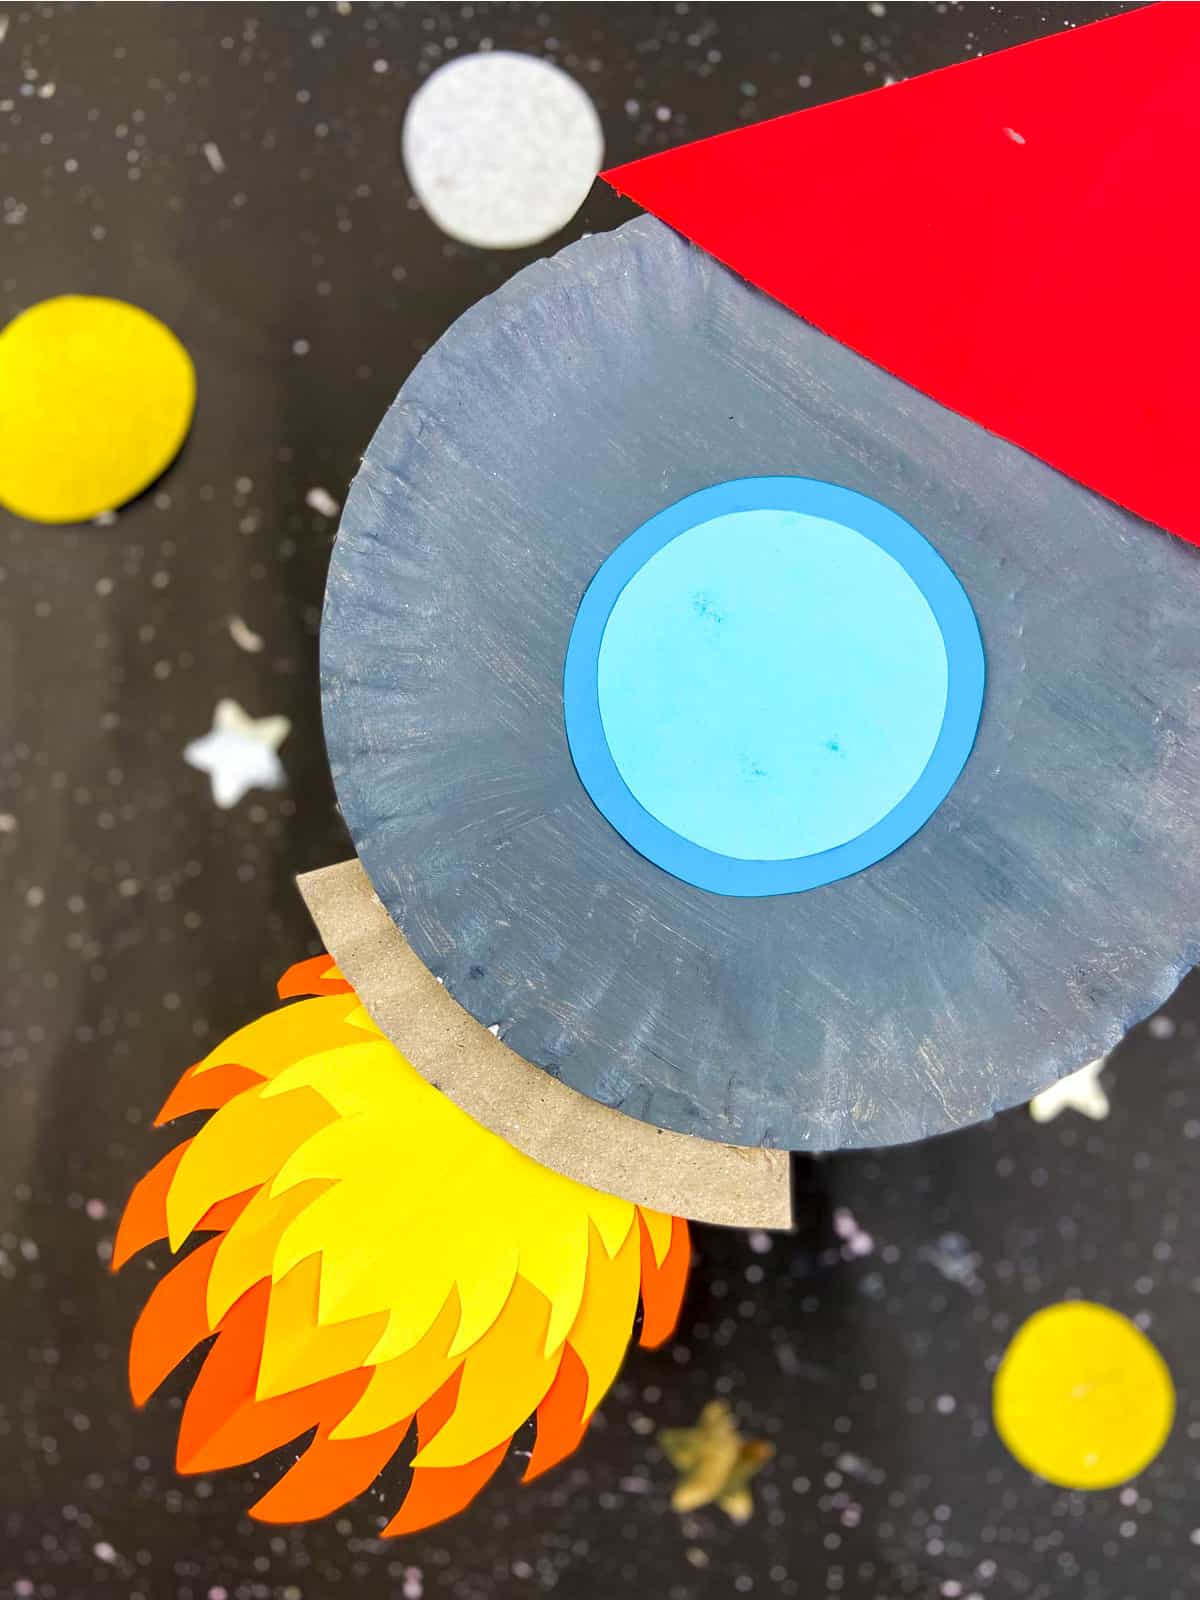 Easy Paper Plate Rocket Craft For Kids - Made with HAPPY